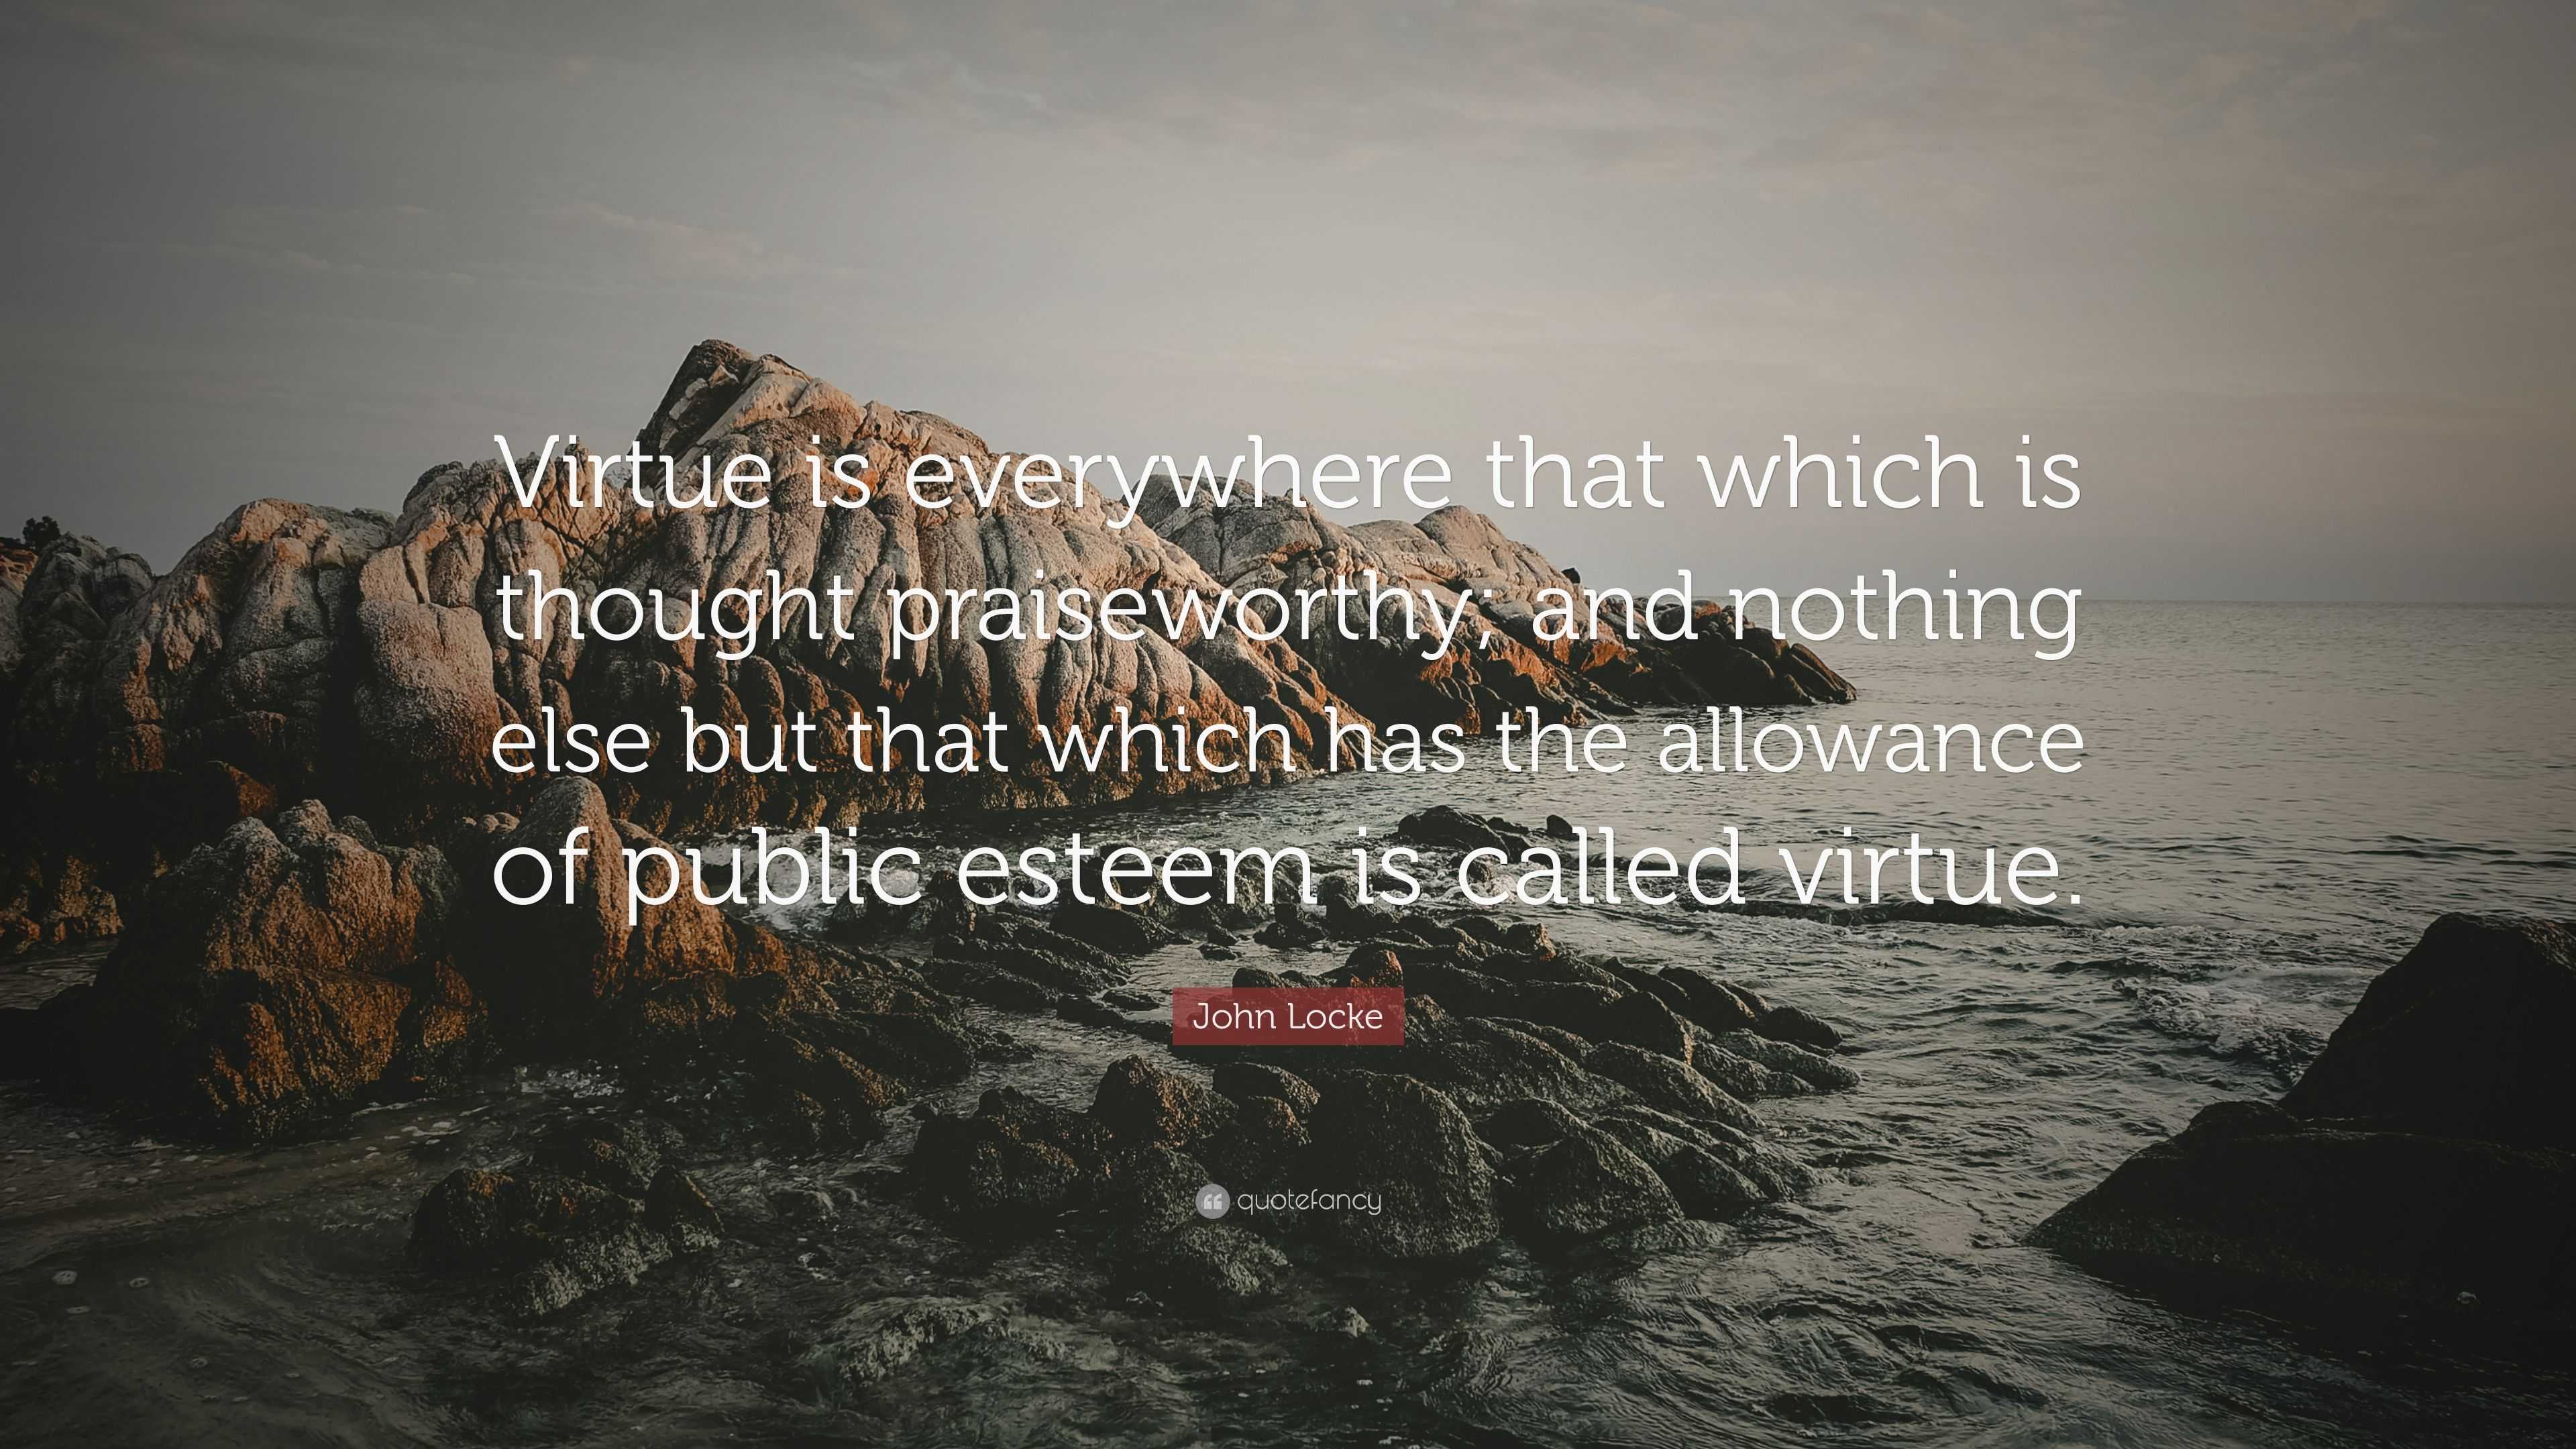 John Locke Quote: “Virtue is everywhere that which is thought ...